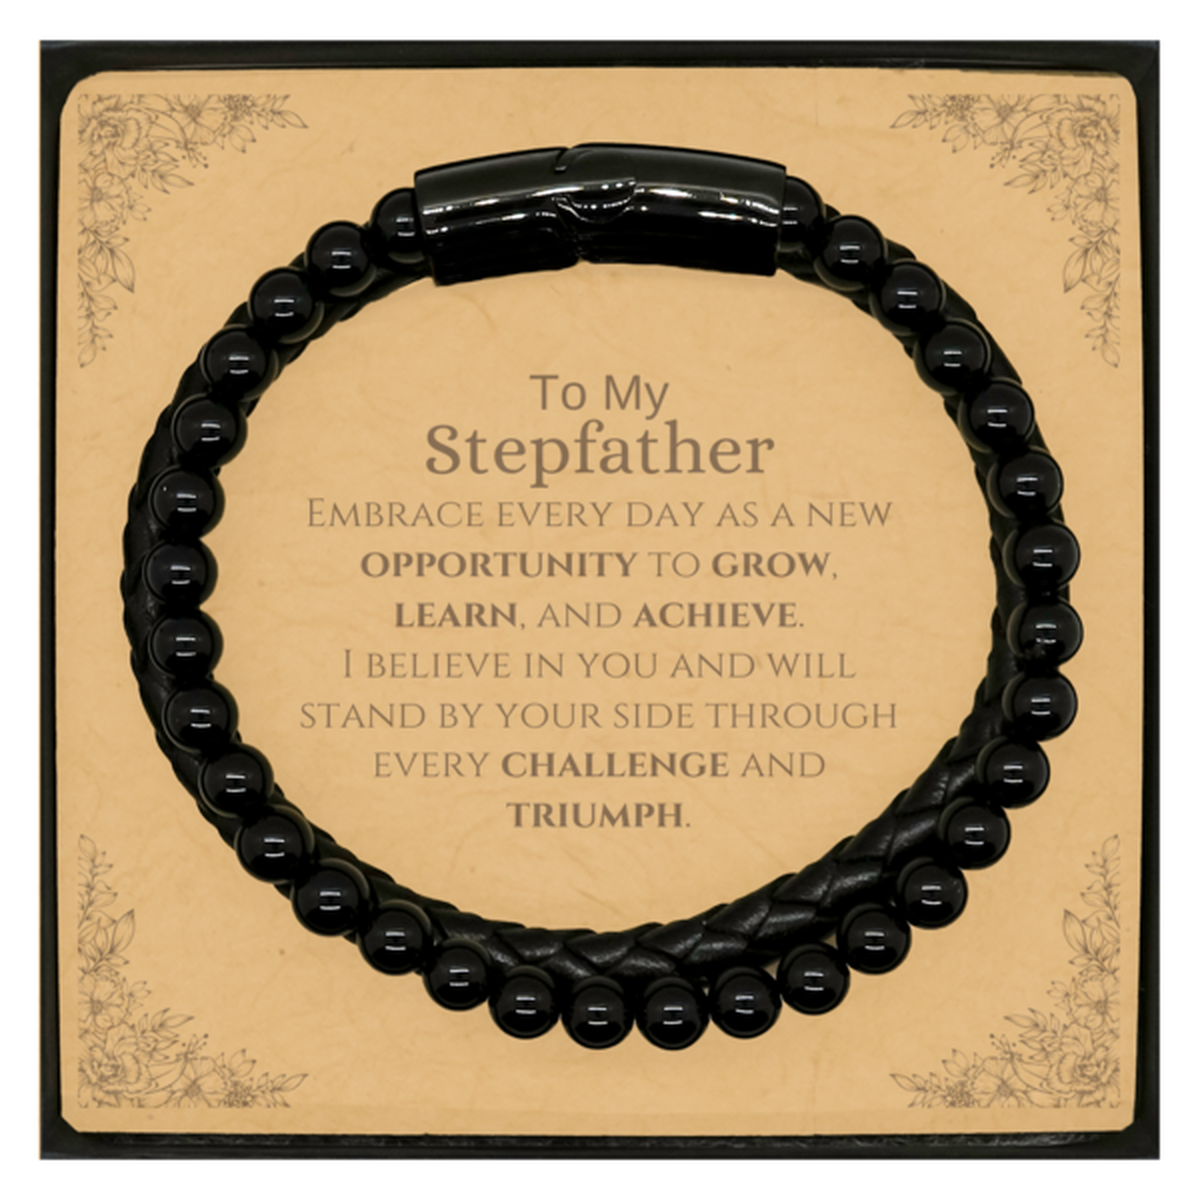 To My Stepfather Gifts, I believe in you and will stand by your side, Inspirational Stone Leather Bracelets For Stepfather, Birthday Christmas Motivational Stepfather Gifts